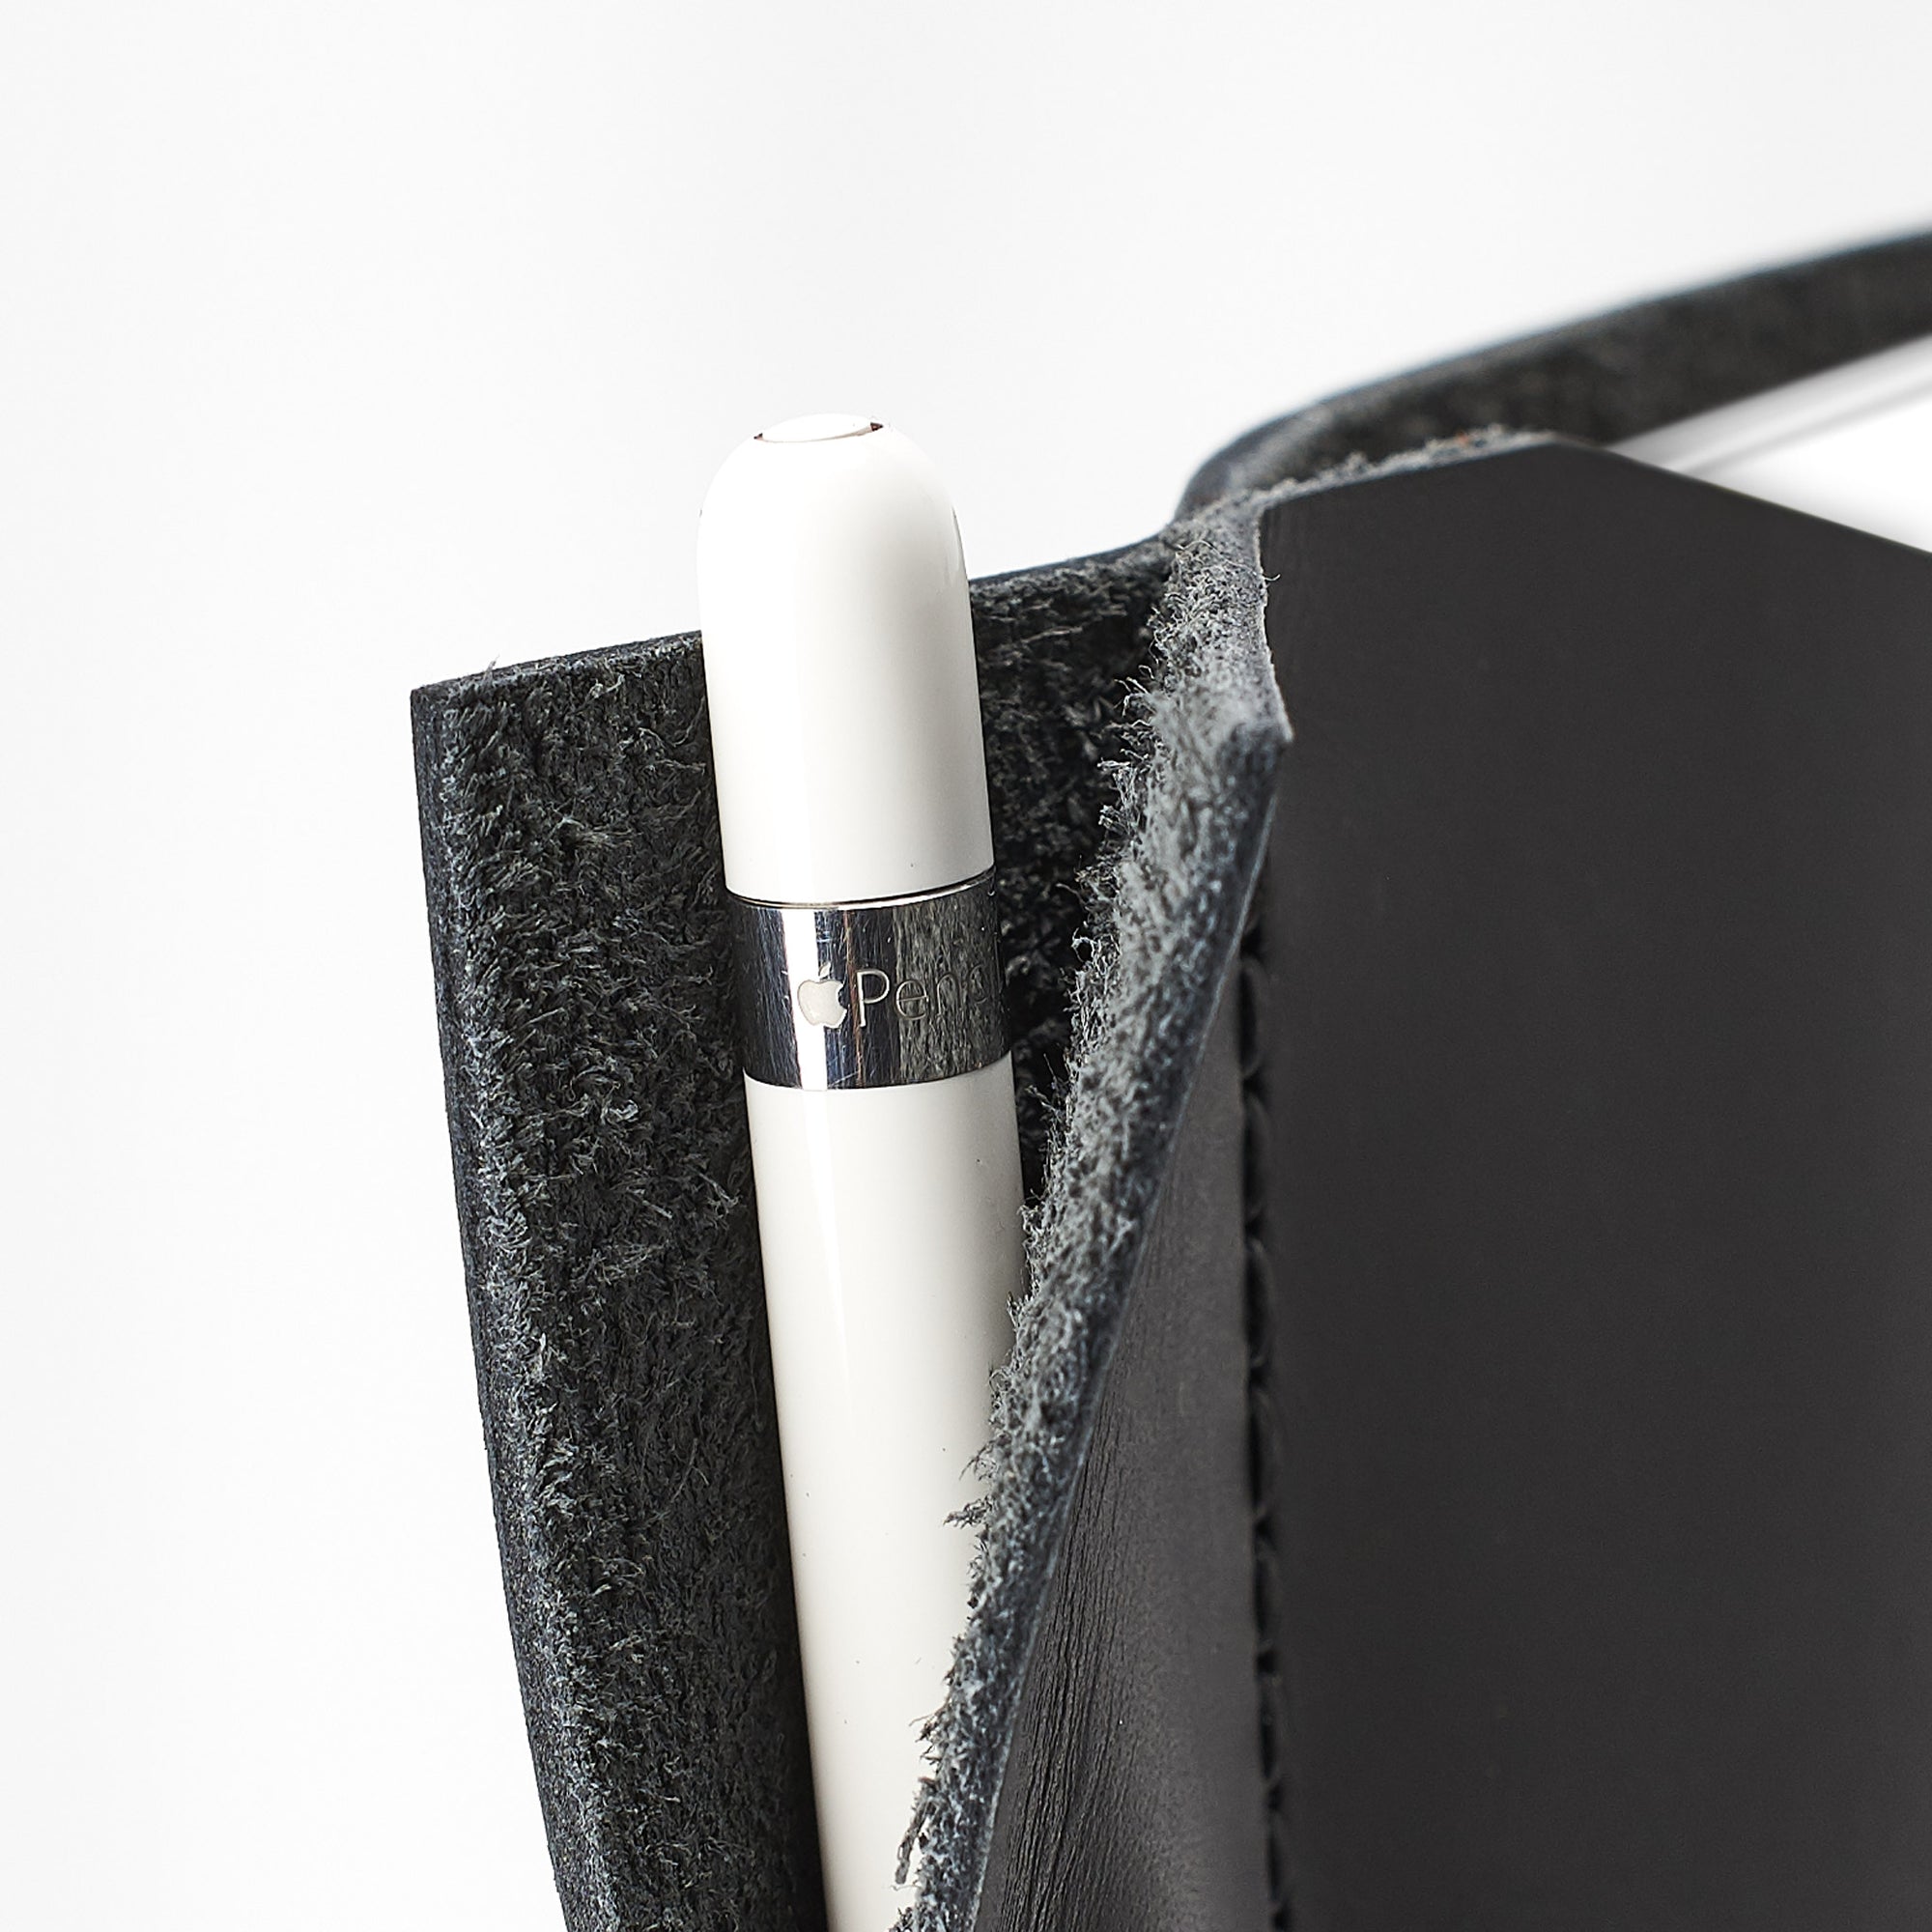 Apple pencil detail. Black iPad pro leather case with pen holder. Soft leather interior